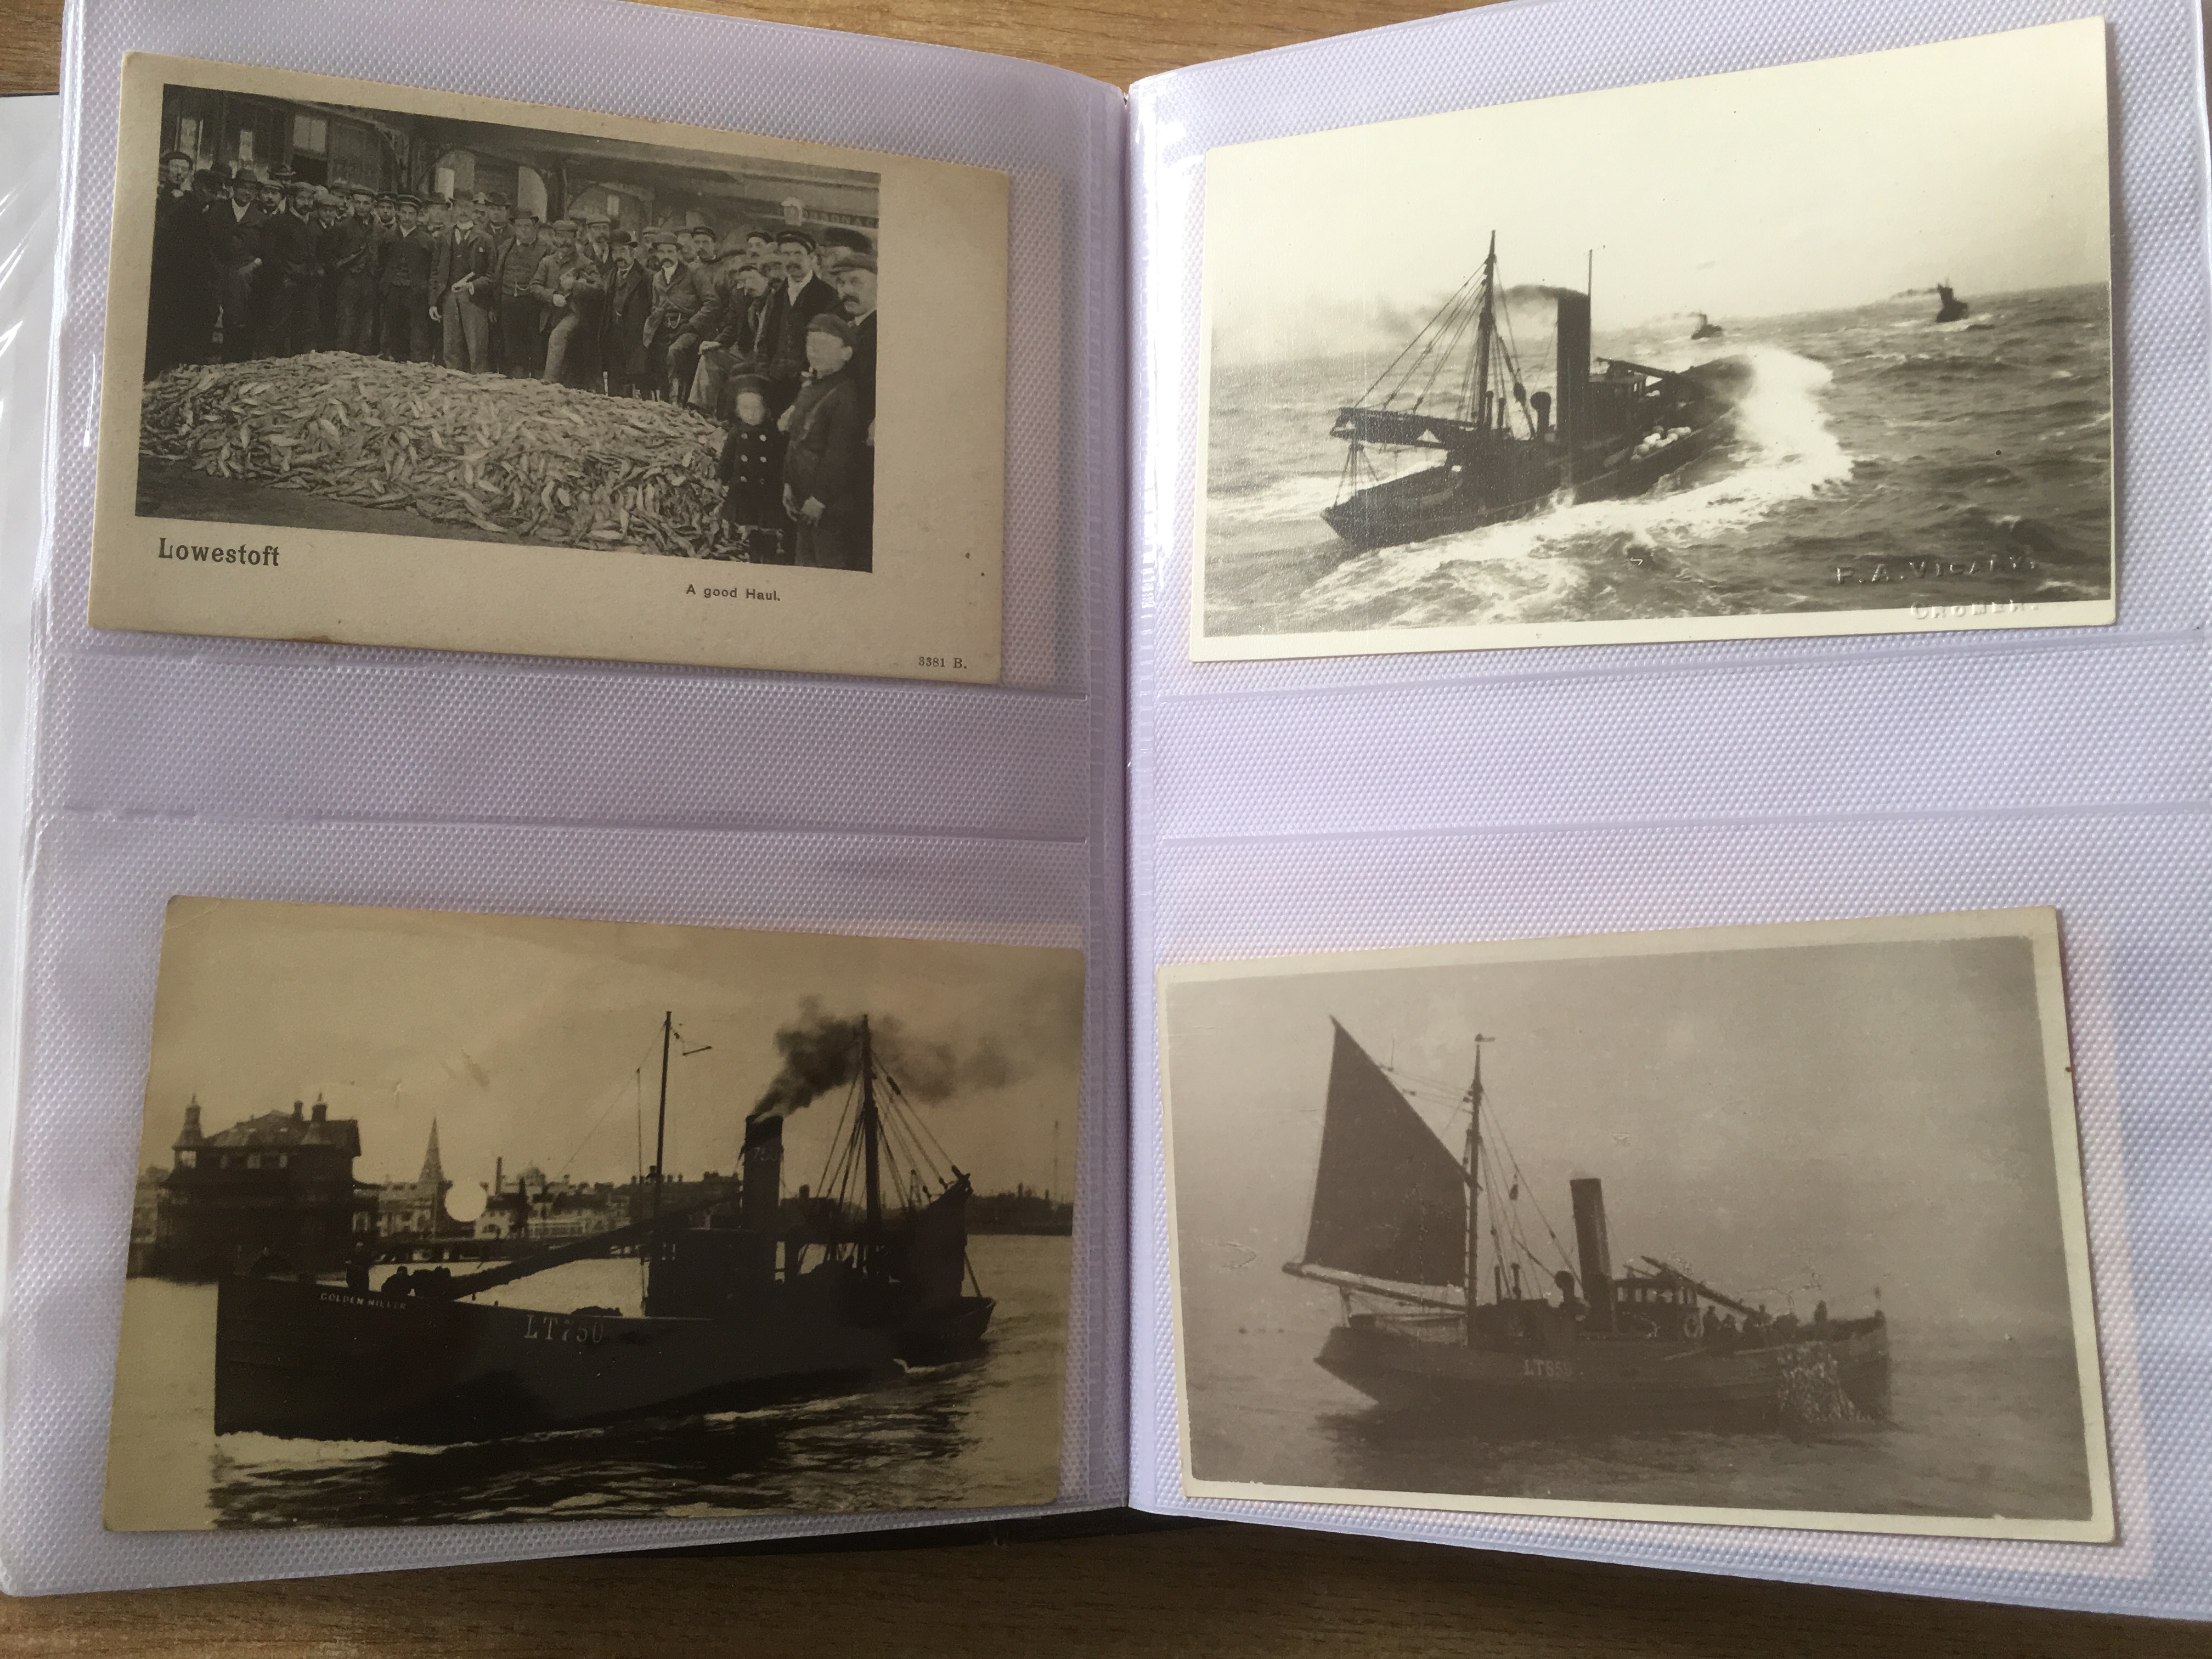 SUFFOLK: ALBUM WITH A COLLECTION OF LOWESTOFT FISHING INDUSTRY POSTCARDS, HARBOUR, TRAWLERS, - Image 6 of 7